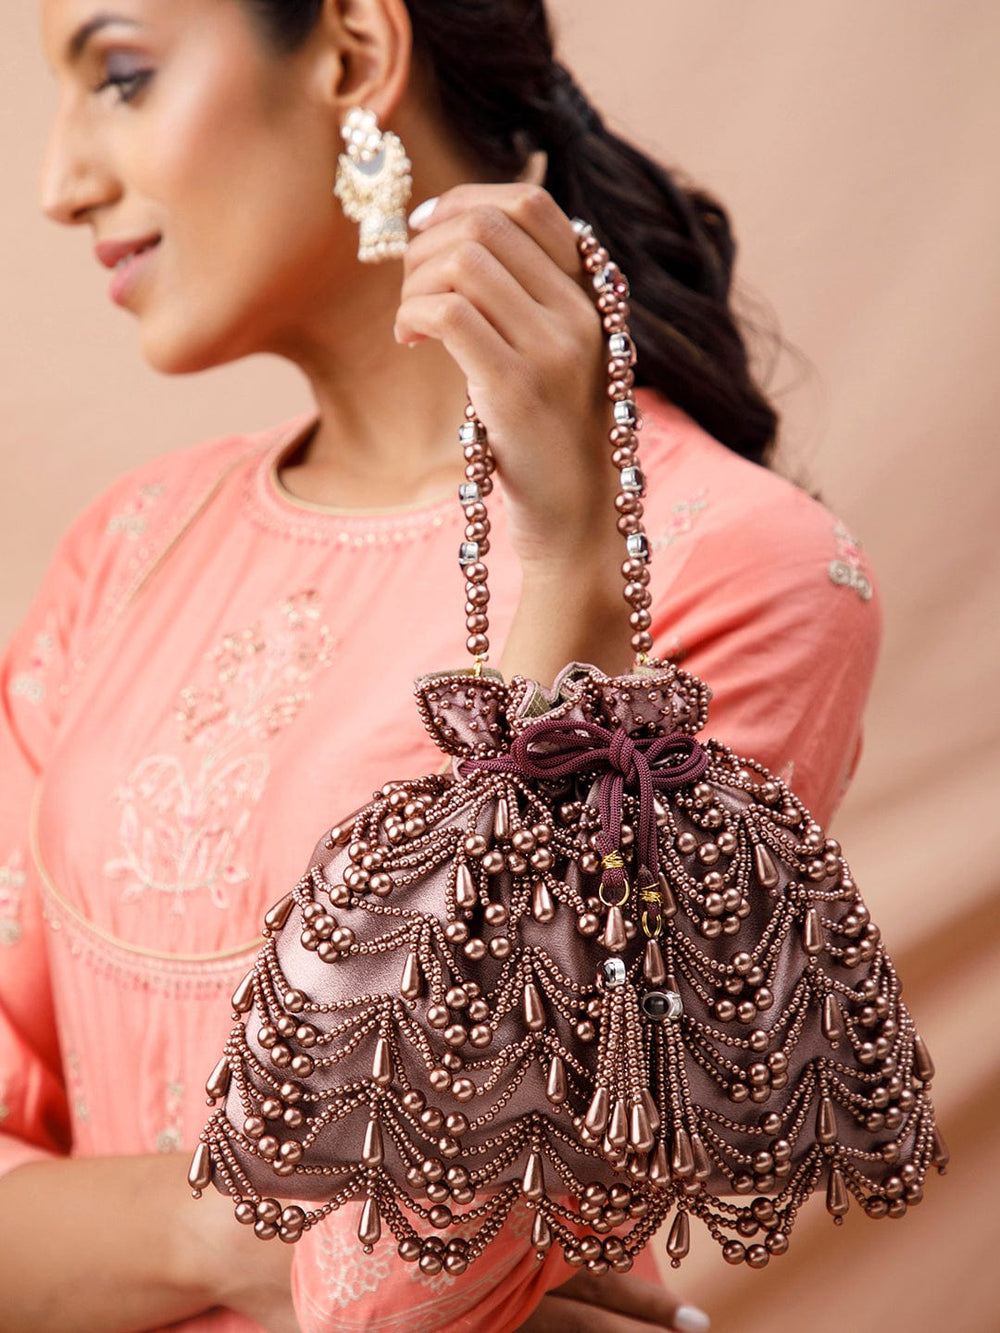 Rubans Potli Bag With Embroided Design Of Pearls. Handbag & Wallet Accessories